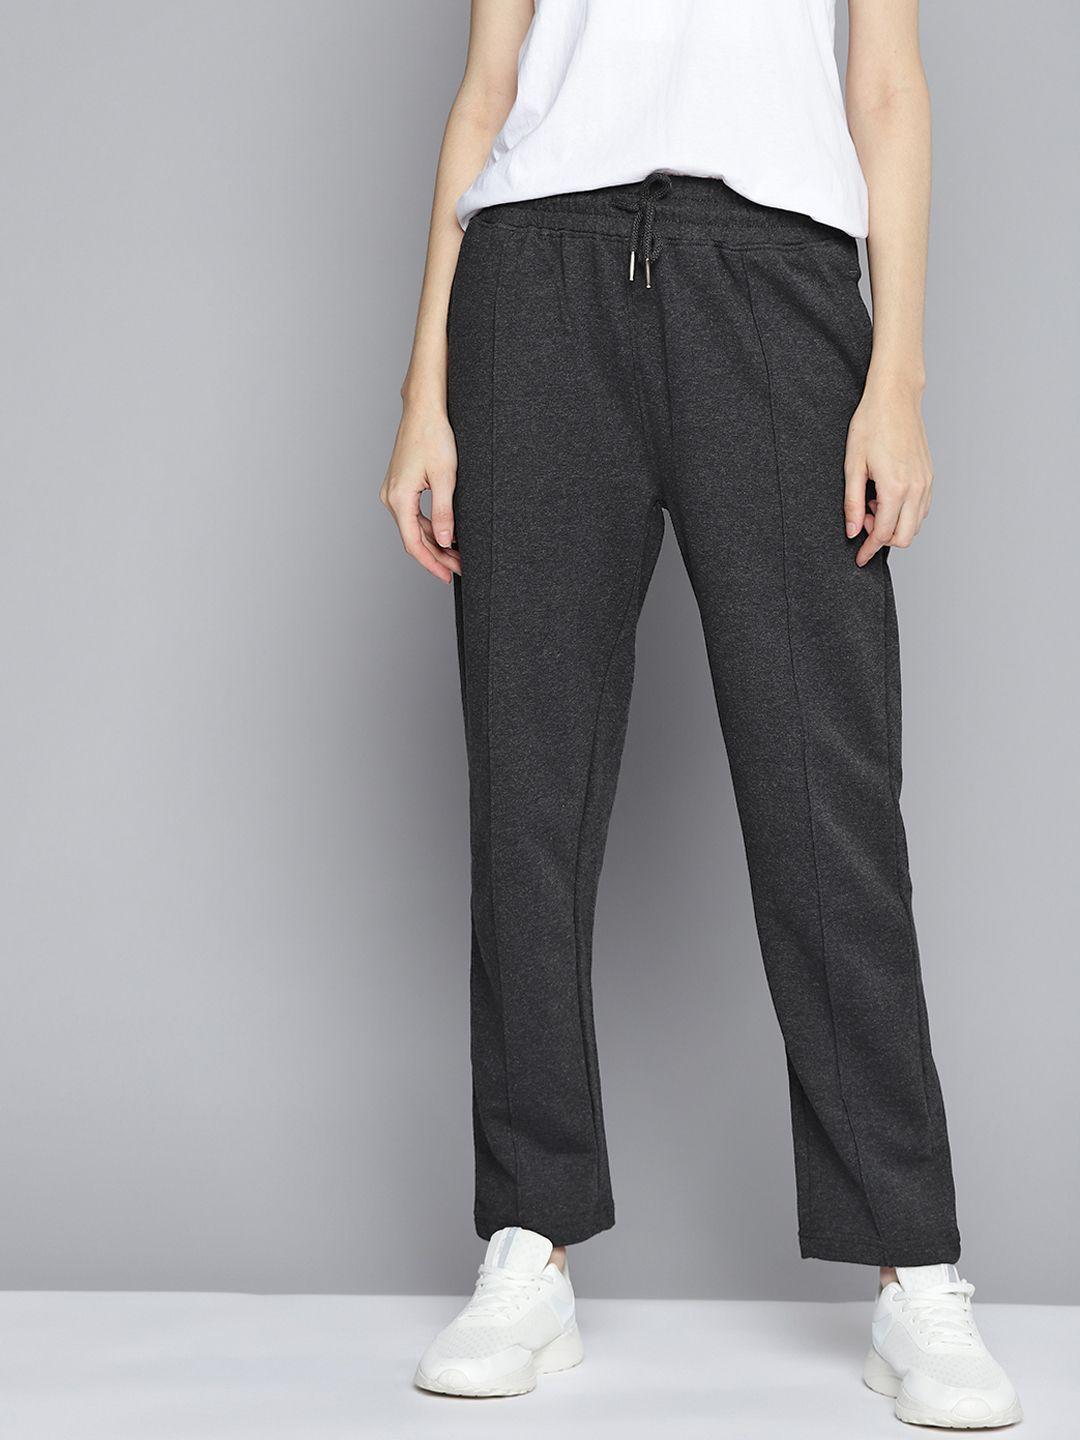 mast & harbour women charcoal grey solid track pants